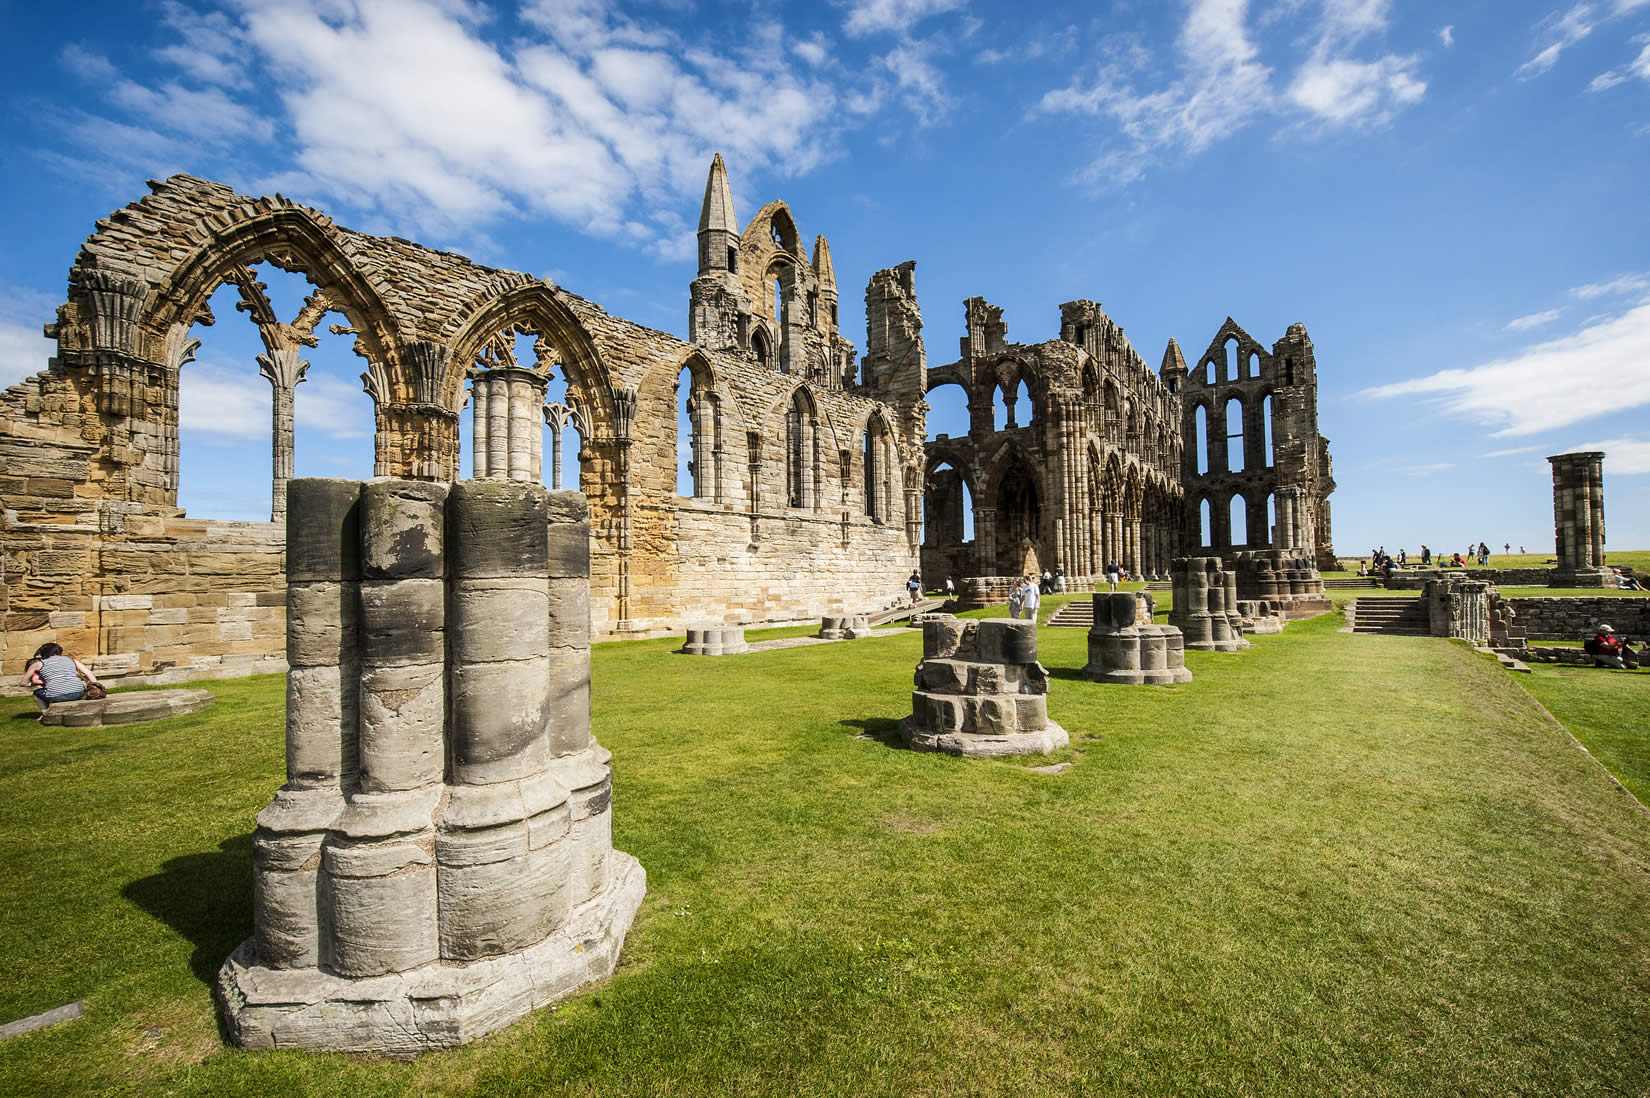 Image name Whitby Abbey the 3 image from the post Whitby Abbey in Yorkshire.com.